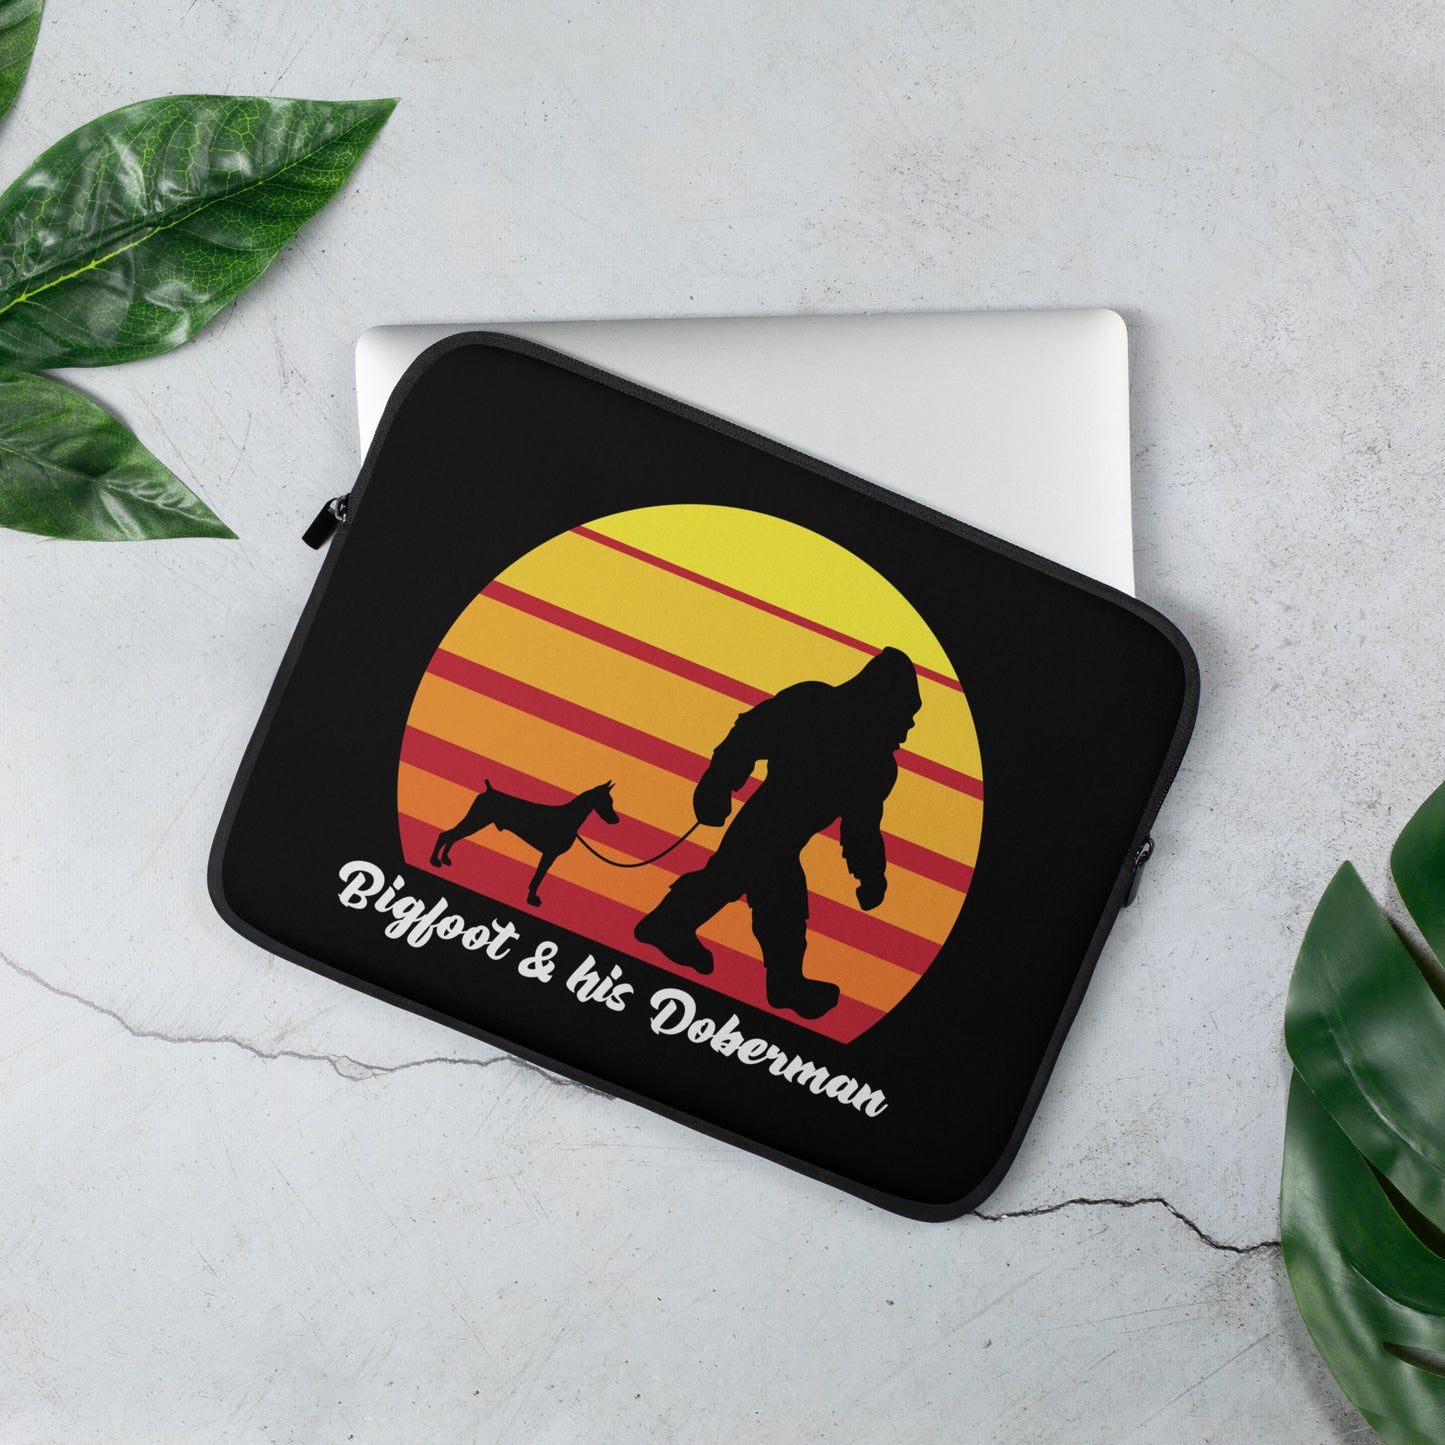 Bigfoot and his Doberman Pinscher Laptop Sleeve by Dog Artistry.